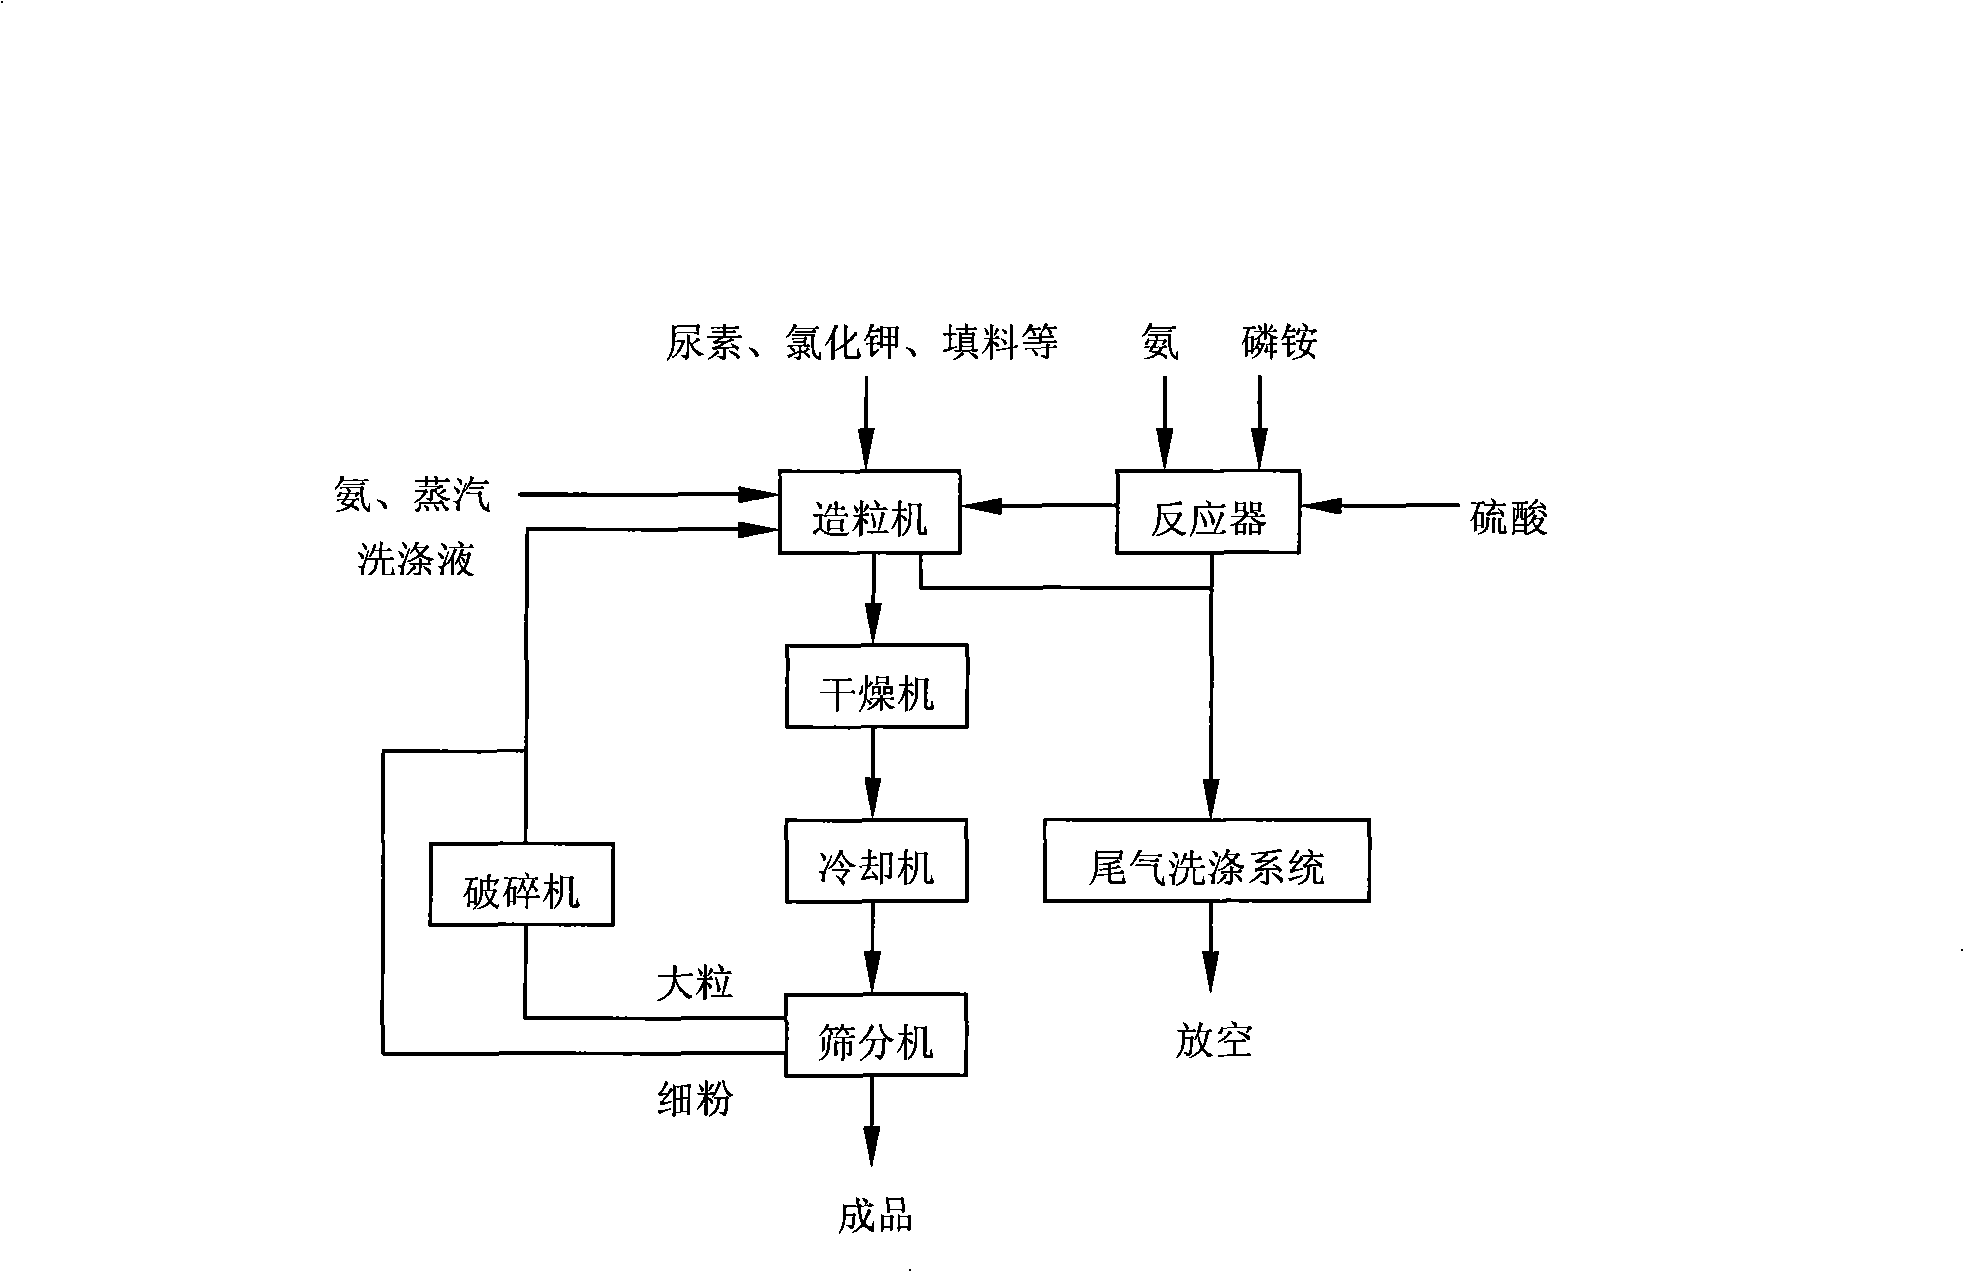 Process for preparing complex fertilizer using sulfuric acid and ammine as partial raw material